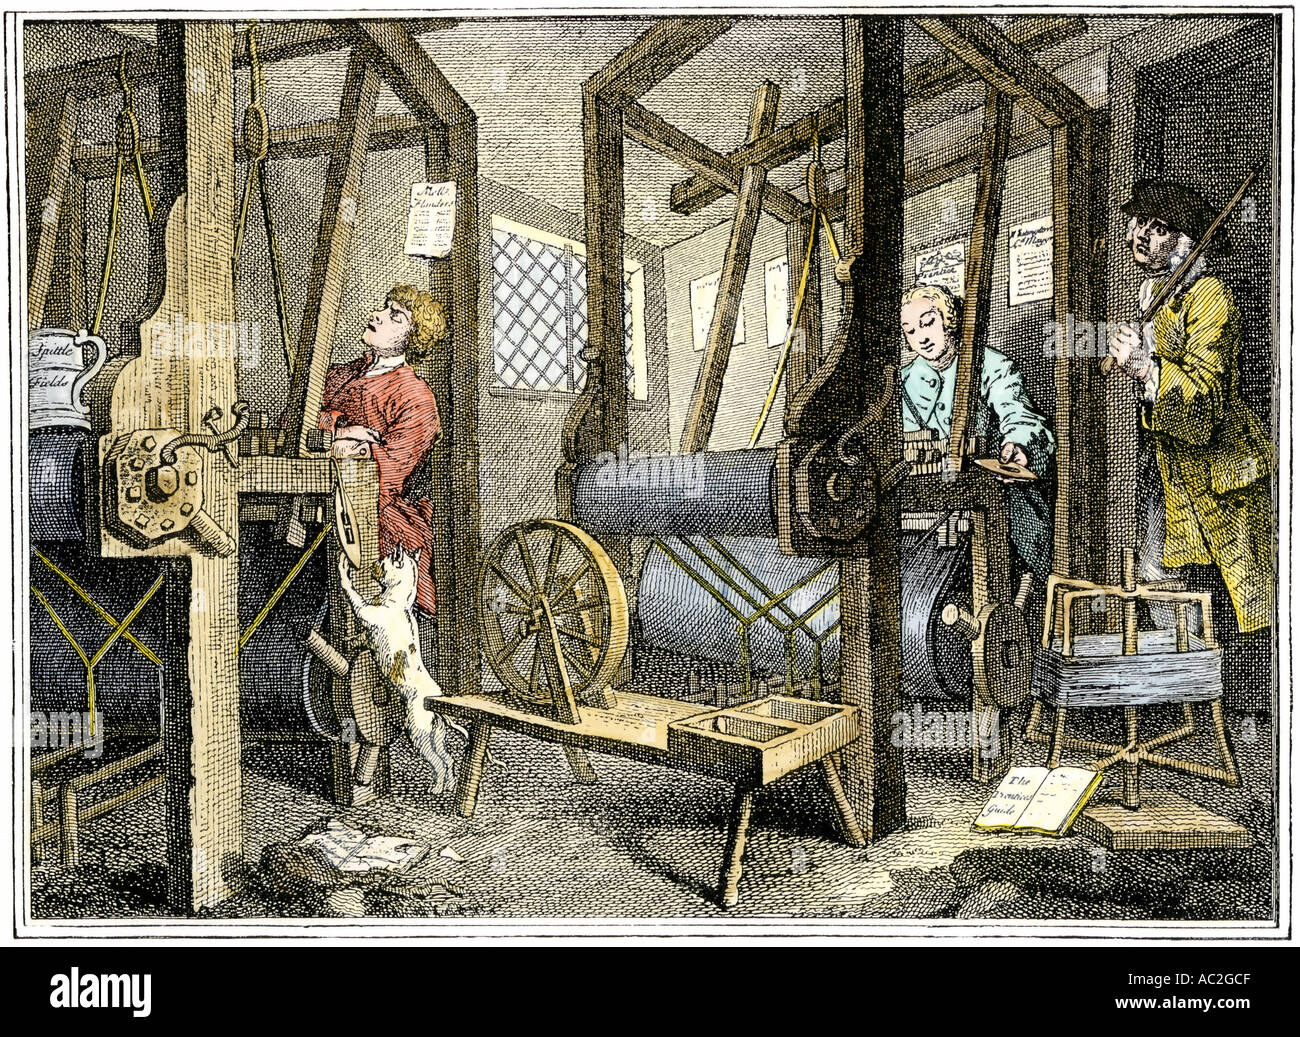 Weaving at Spitalfields England 1700s. Hand-colored woodcut of a Hogarth illustration Stock Photo